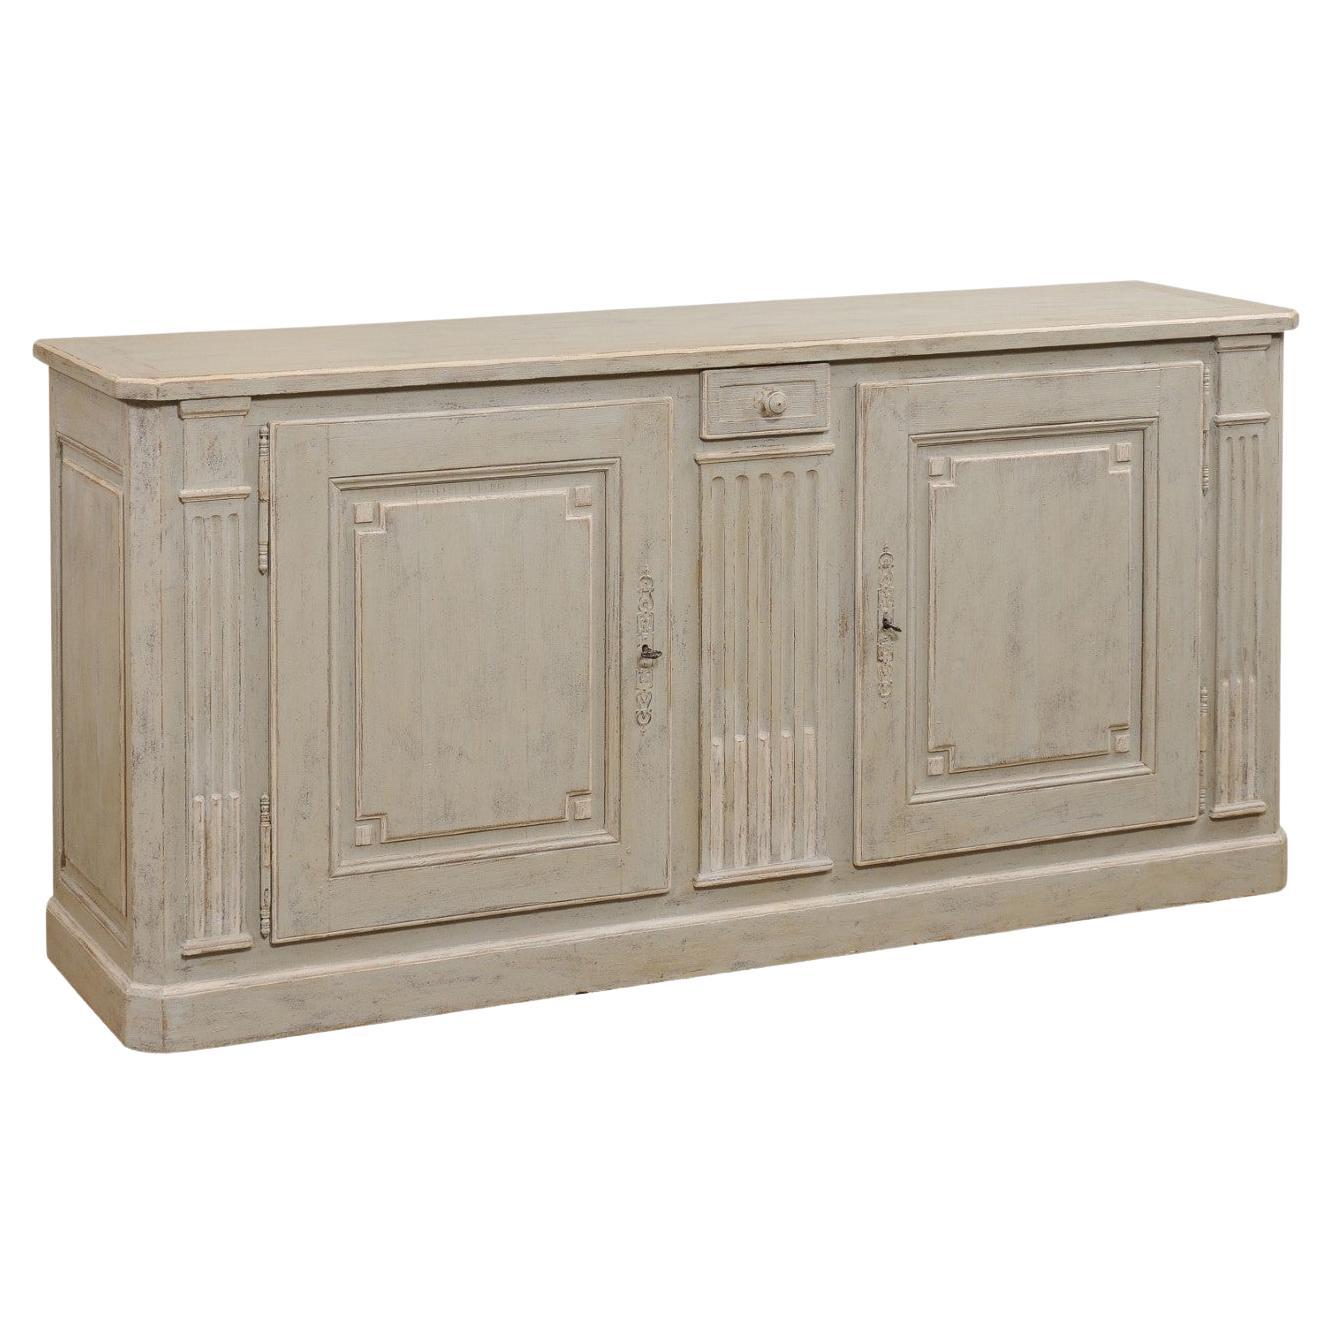 French Louis XVI Style Painted Buffet with Doors, Drawers and Carved Pilasters For Sale